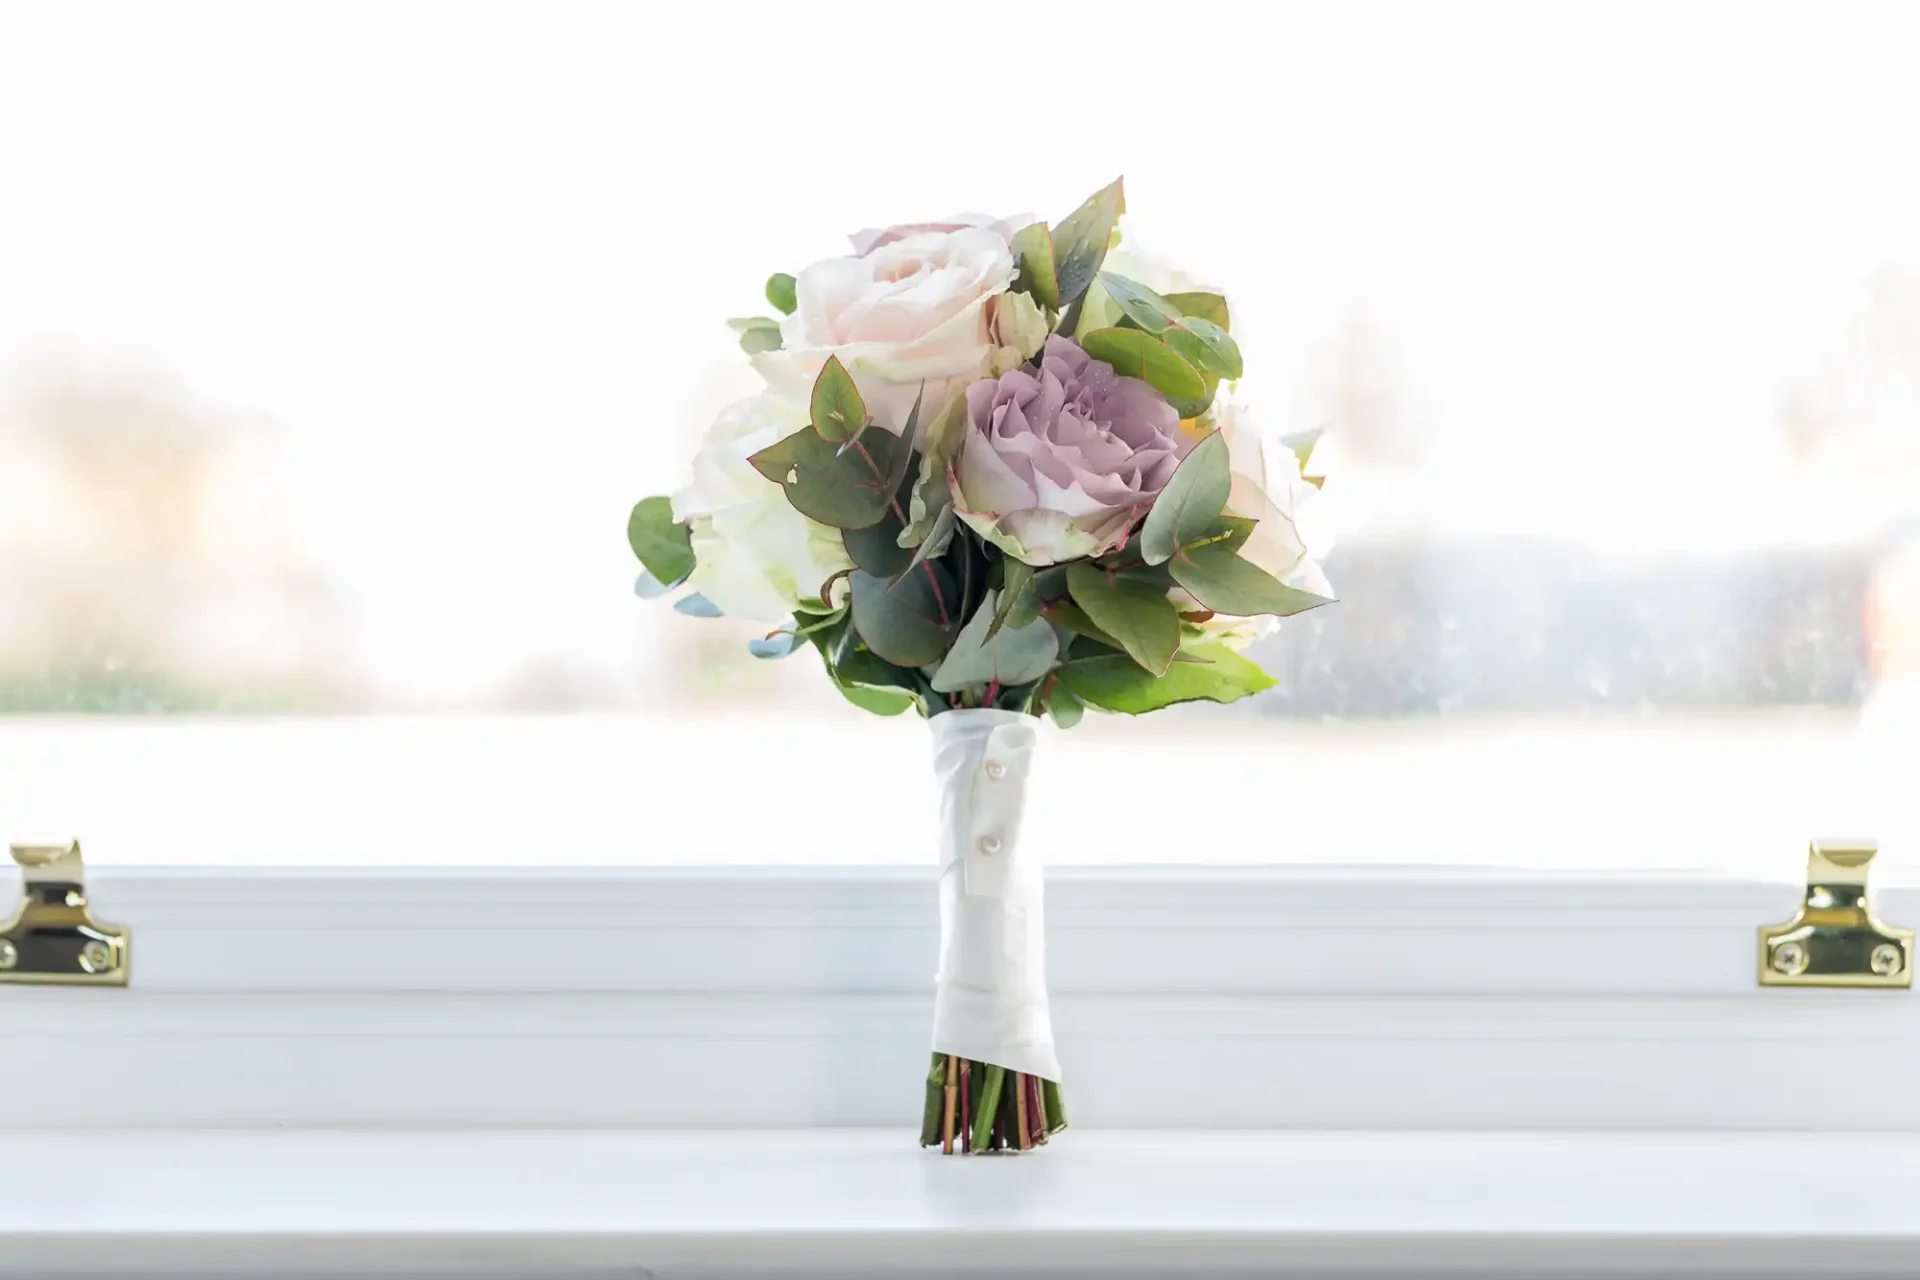 A bouquet of pale purple roses and green foliage in a white vase, placed on a windowsill with a bright background.